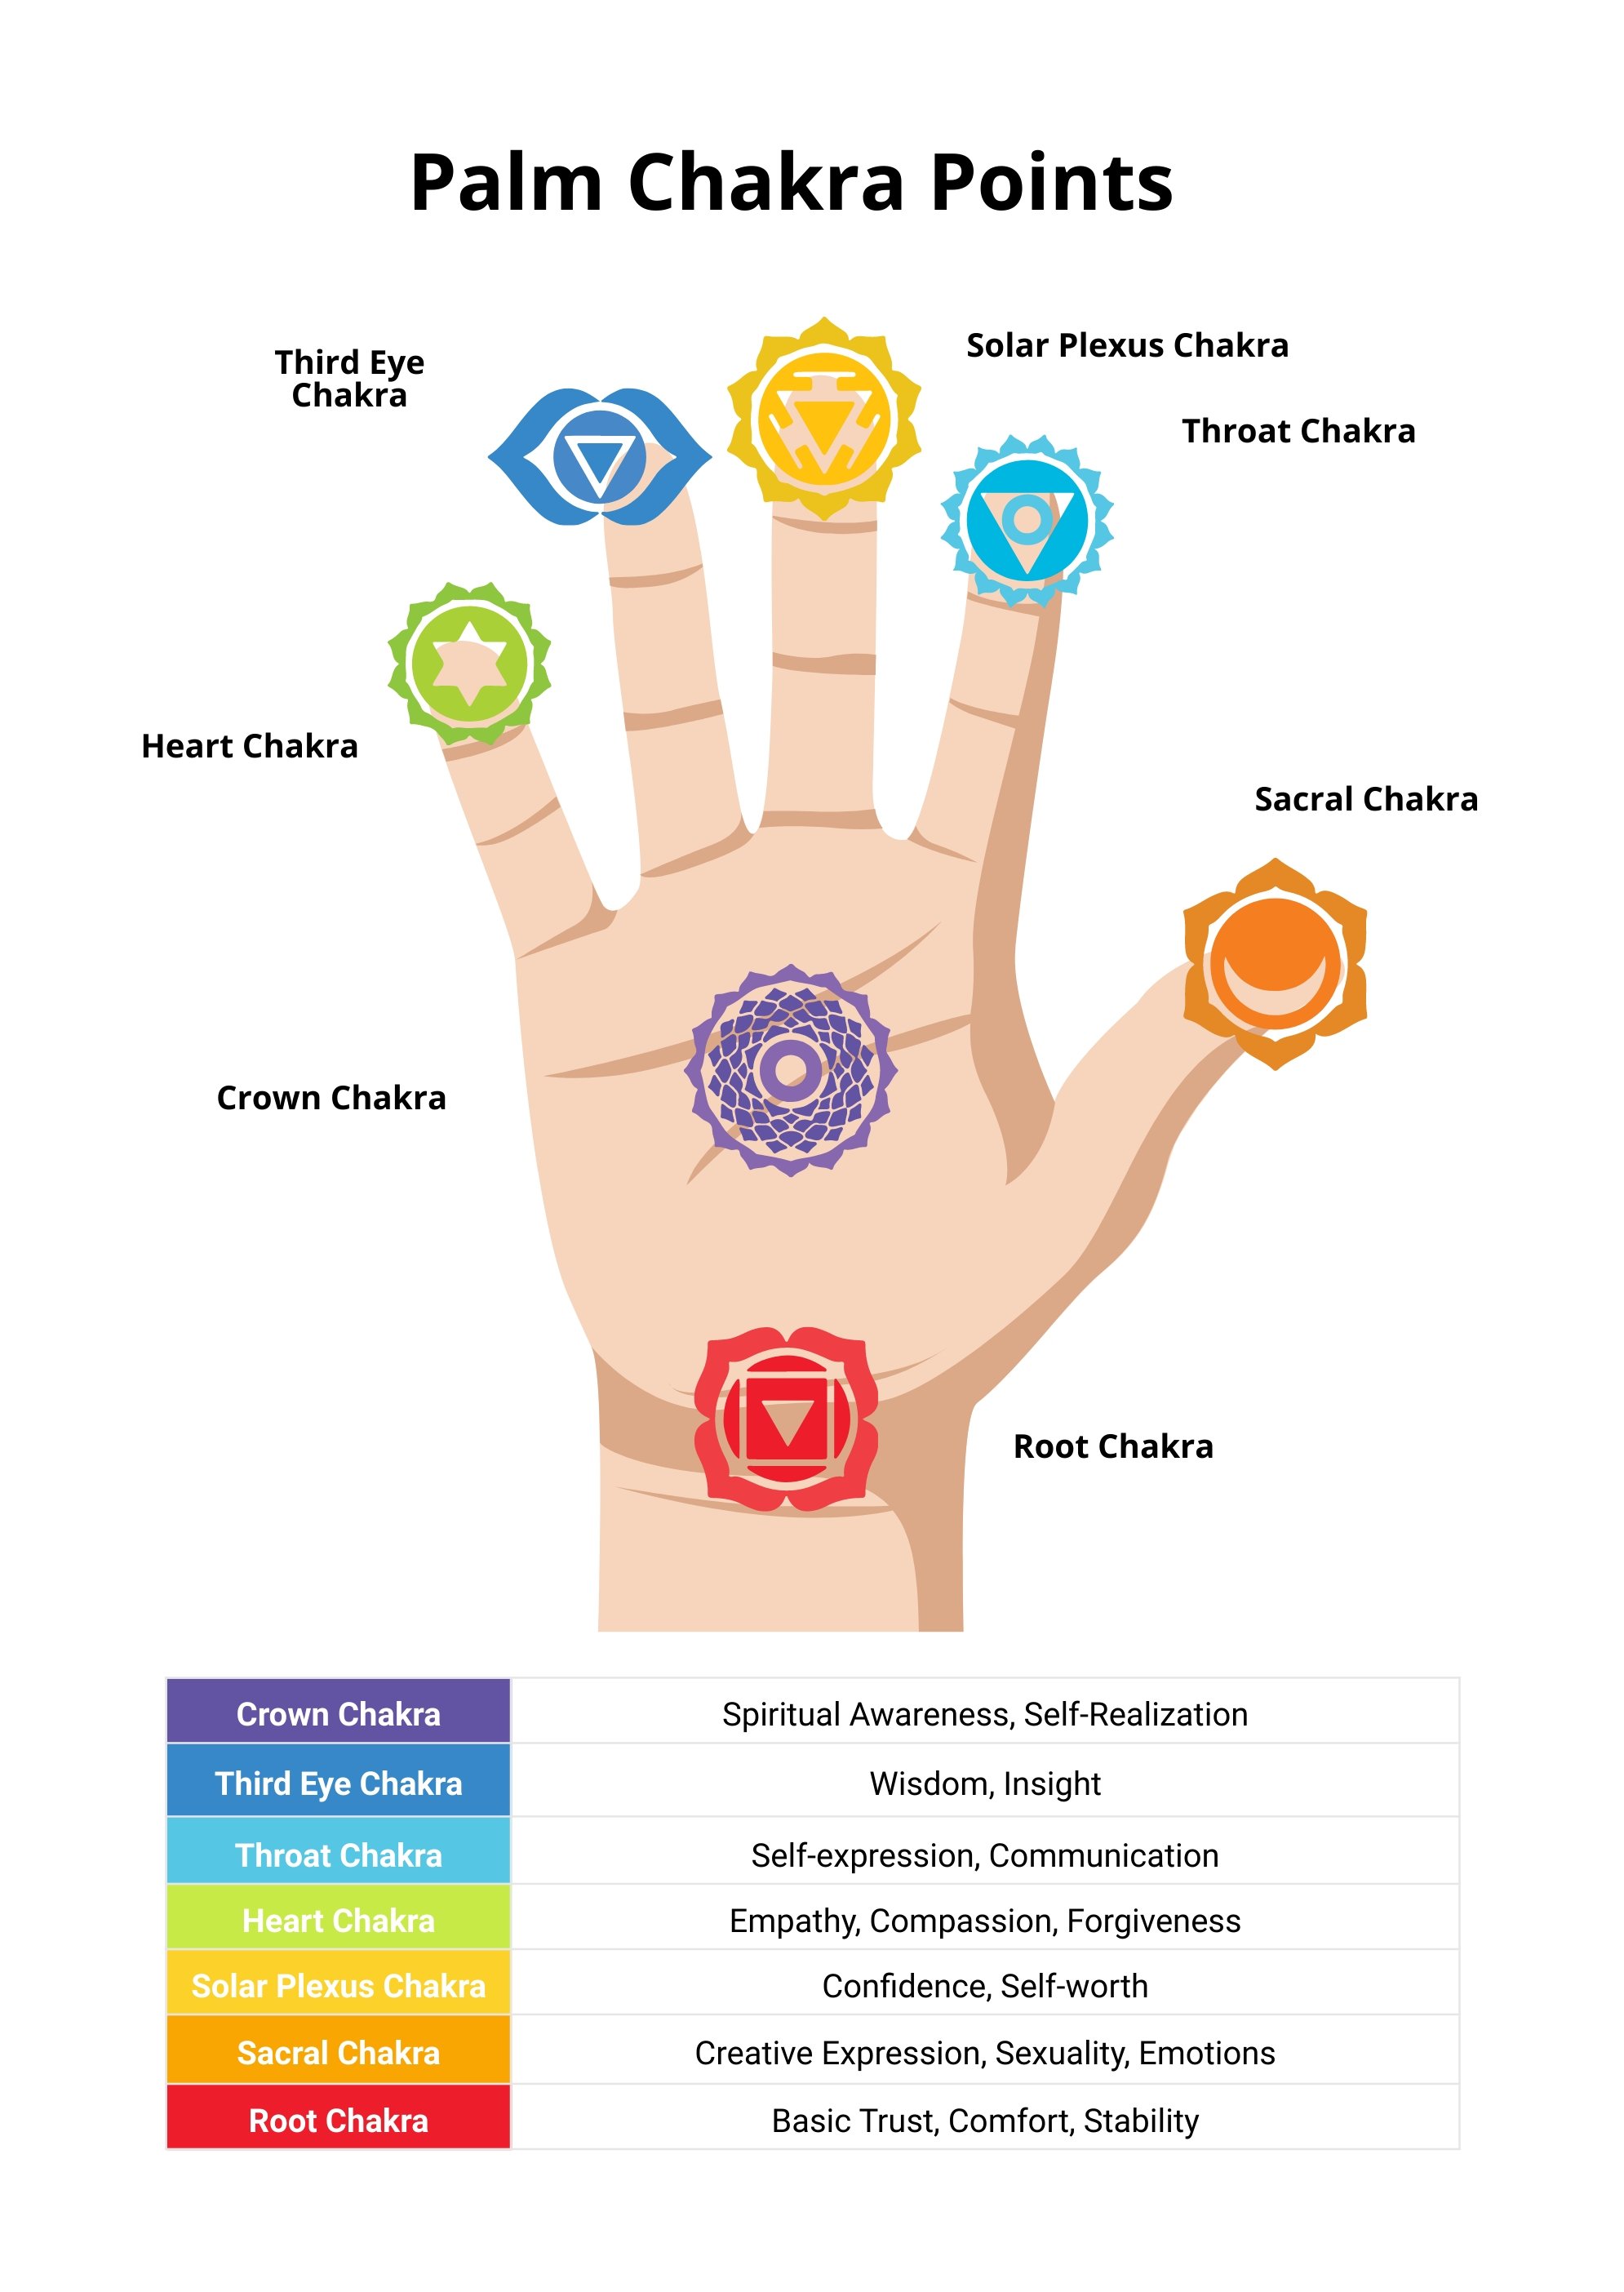 Healing Hands: 7 Hastha Mudras To Relieve Wrist Pain In Yoga